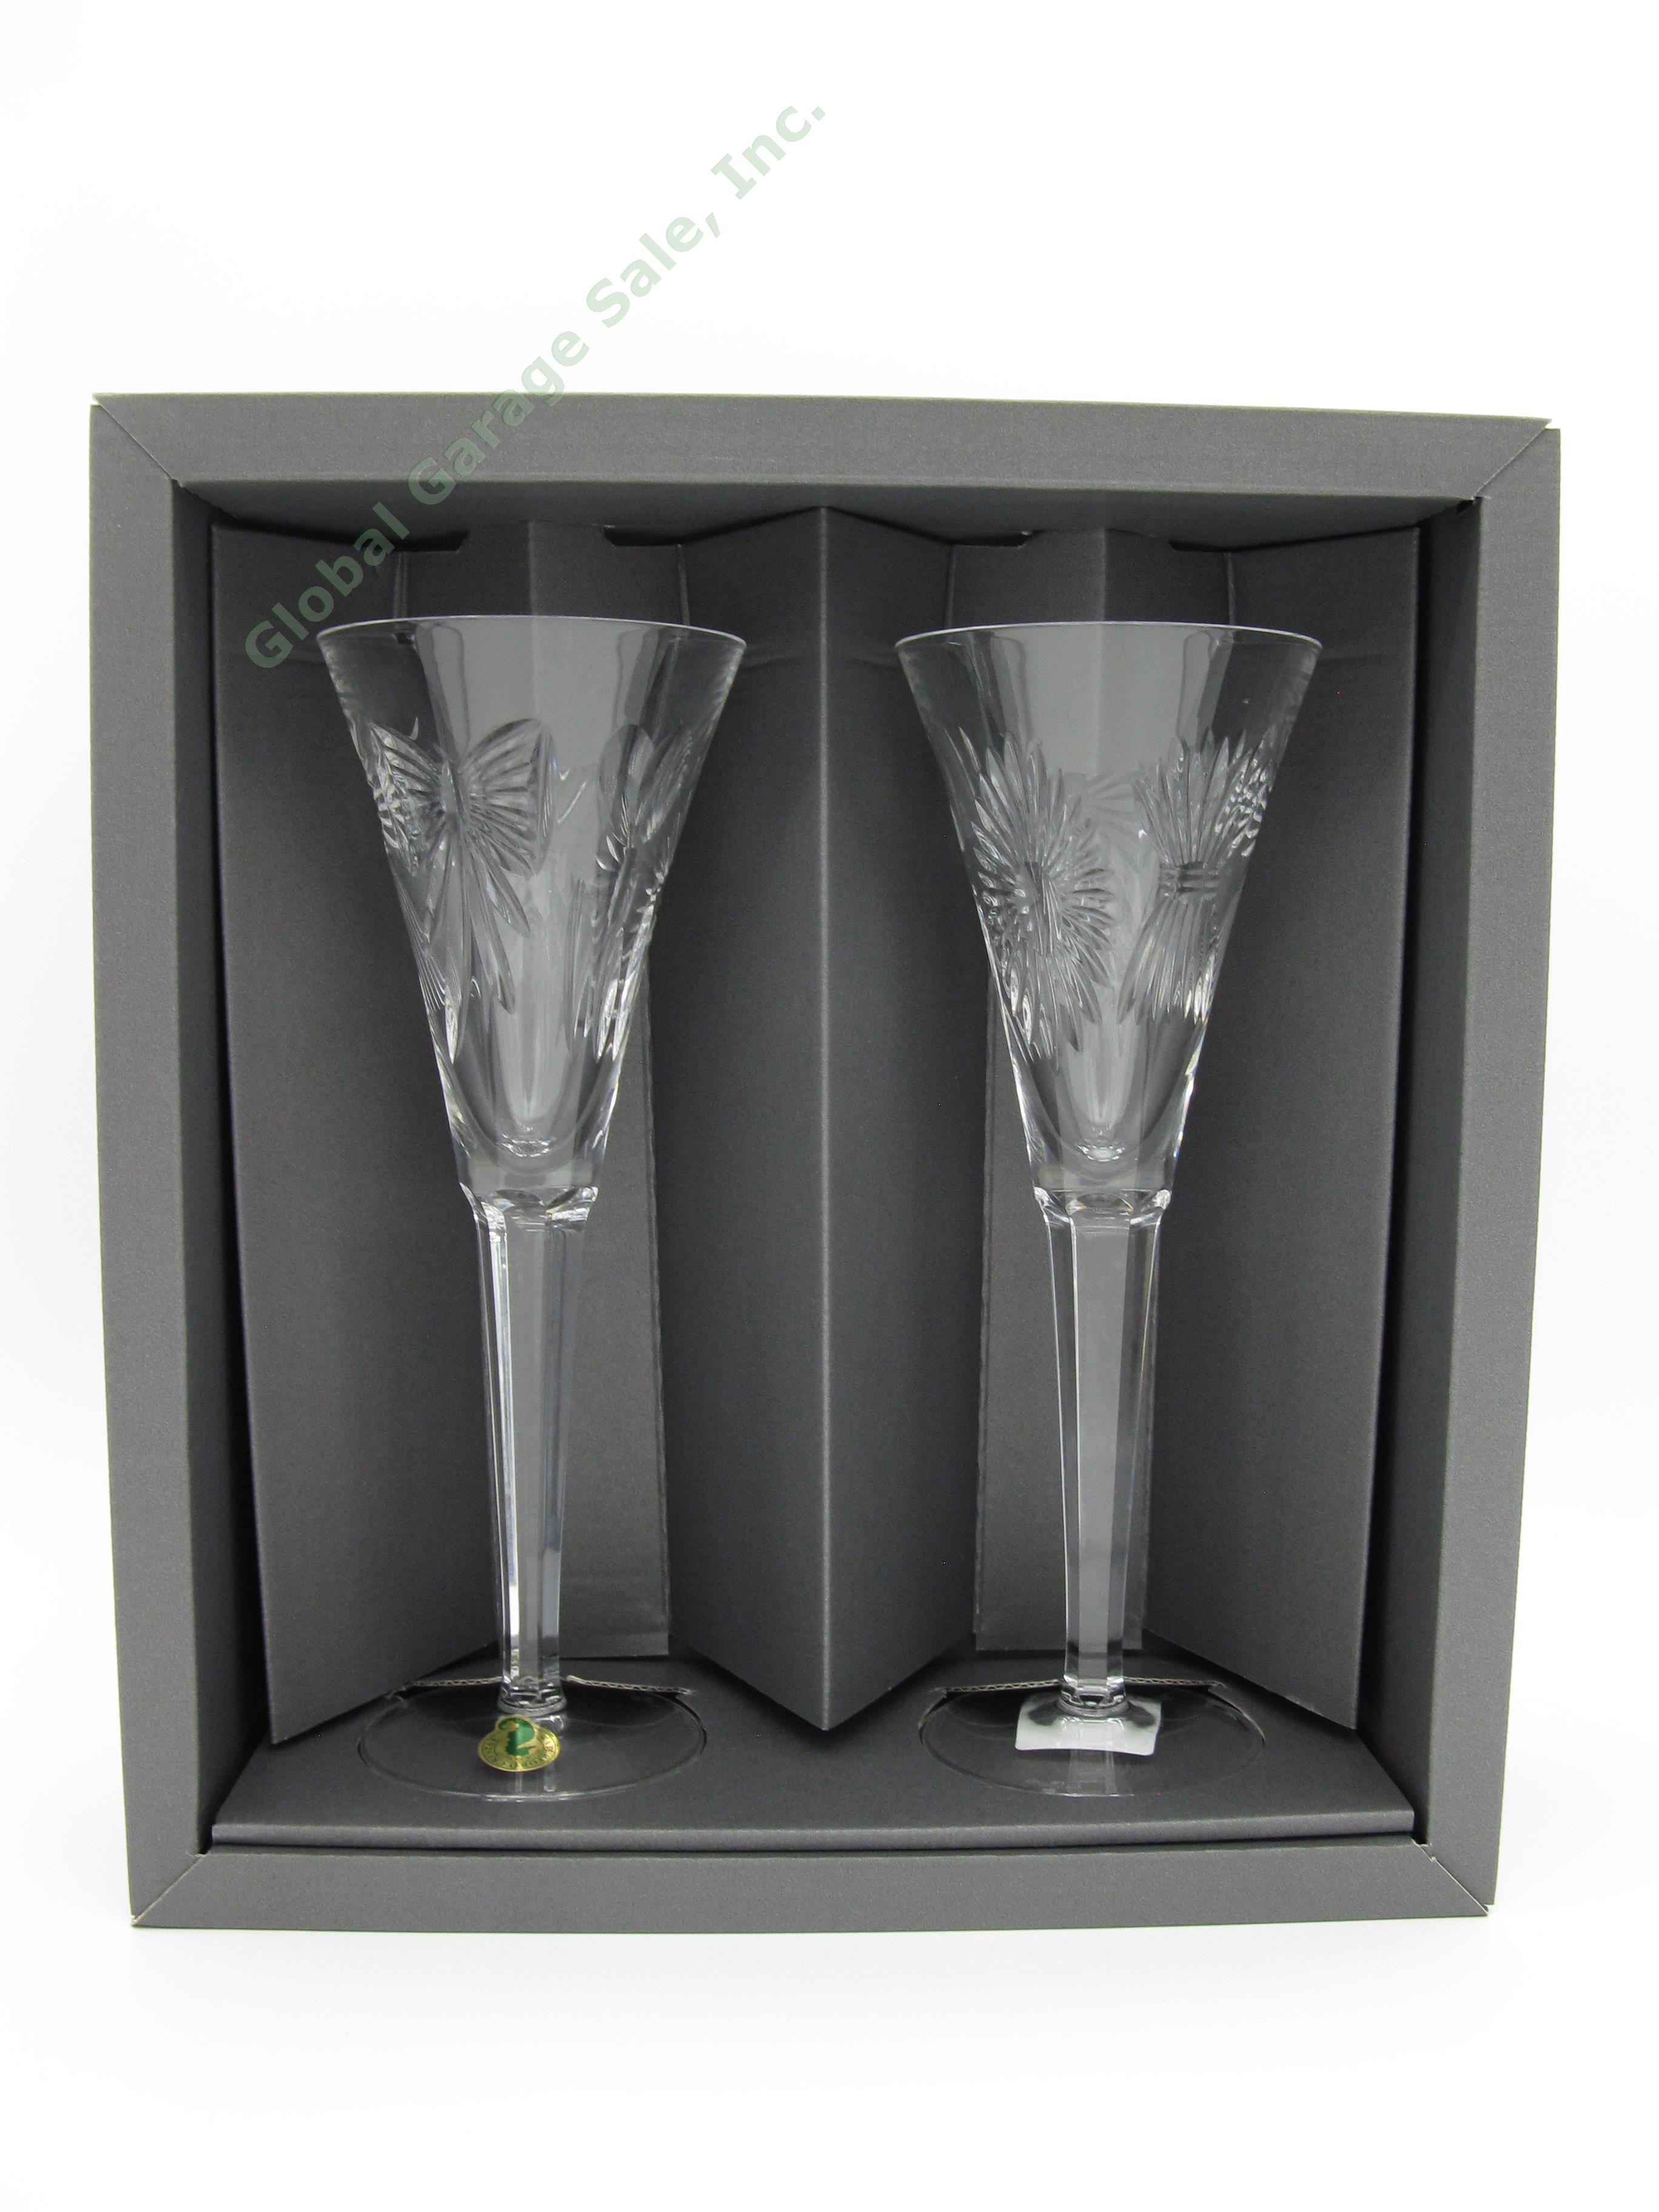 4 Waterford Crystal Millennium Universal-5 Toasting Flute Champagne Glasses NR! 25